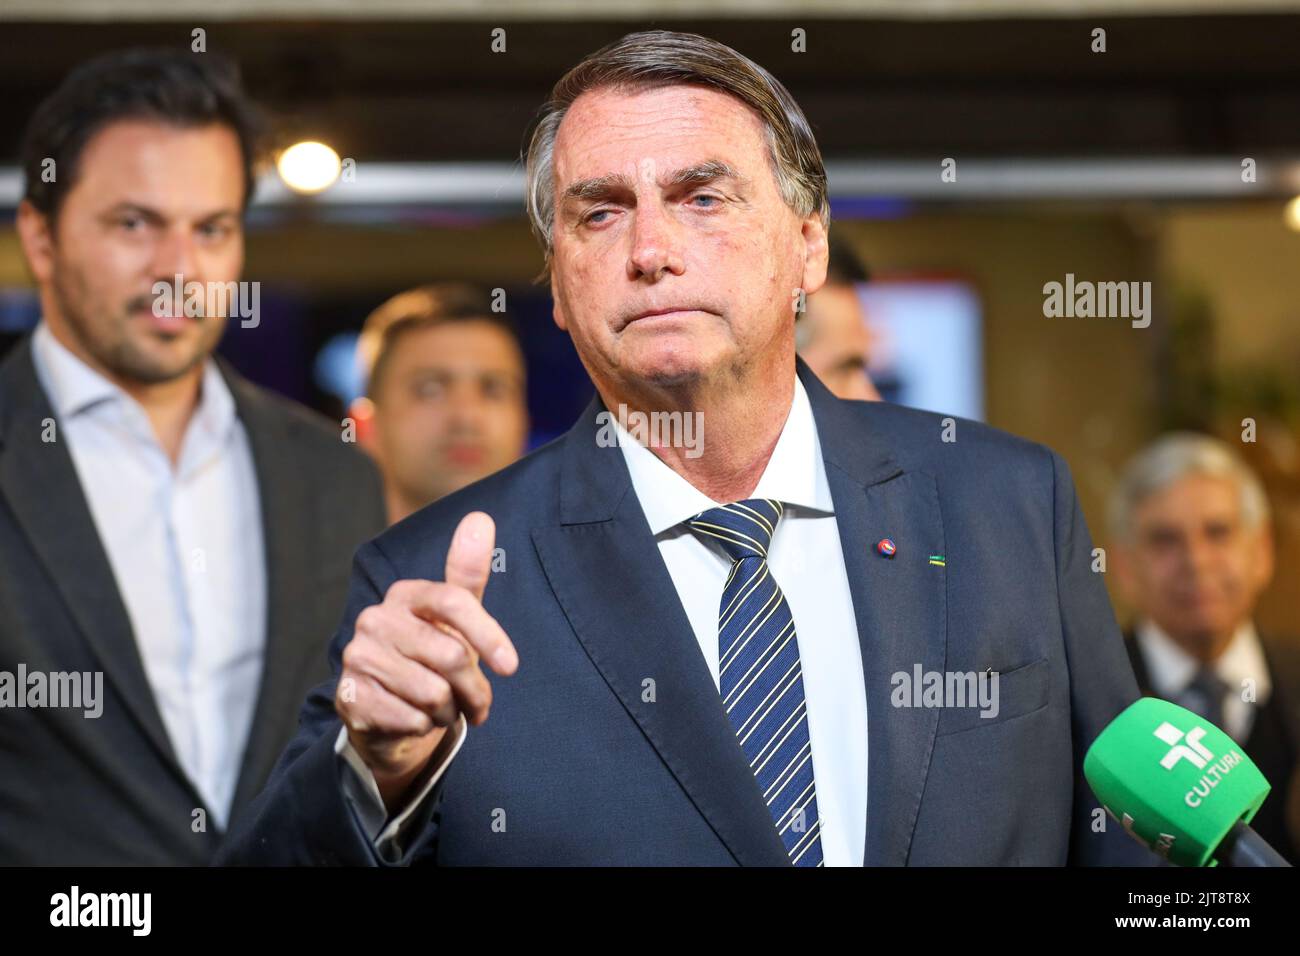 Sao Paulo, Brazil. 28th Aug, 2022. The President of Brazil Jair Bolsonaro is seen arriving at the debate between the candidates for the Presidency of the Republic at the headquarters of Grupo Bandeirantes in the Morumbi neighborhood in the southern region of São Paulo on Sunday night, 28. Credit: Brazil Photo Press/Alamy Live News Credit: Brazil Photo Press/Alamy Live News Stock Photo